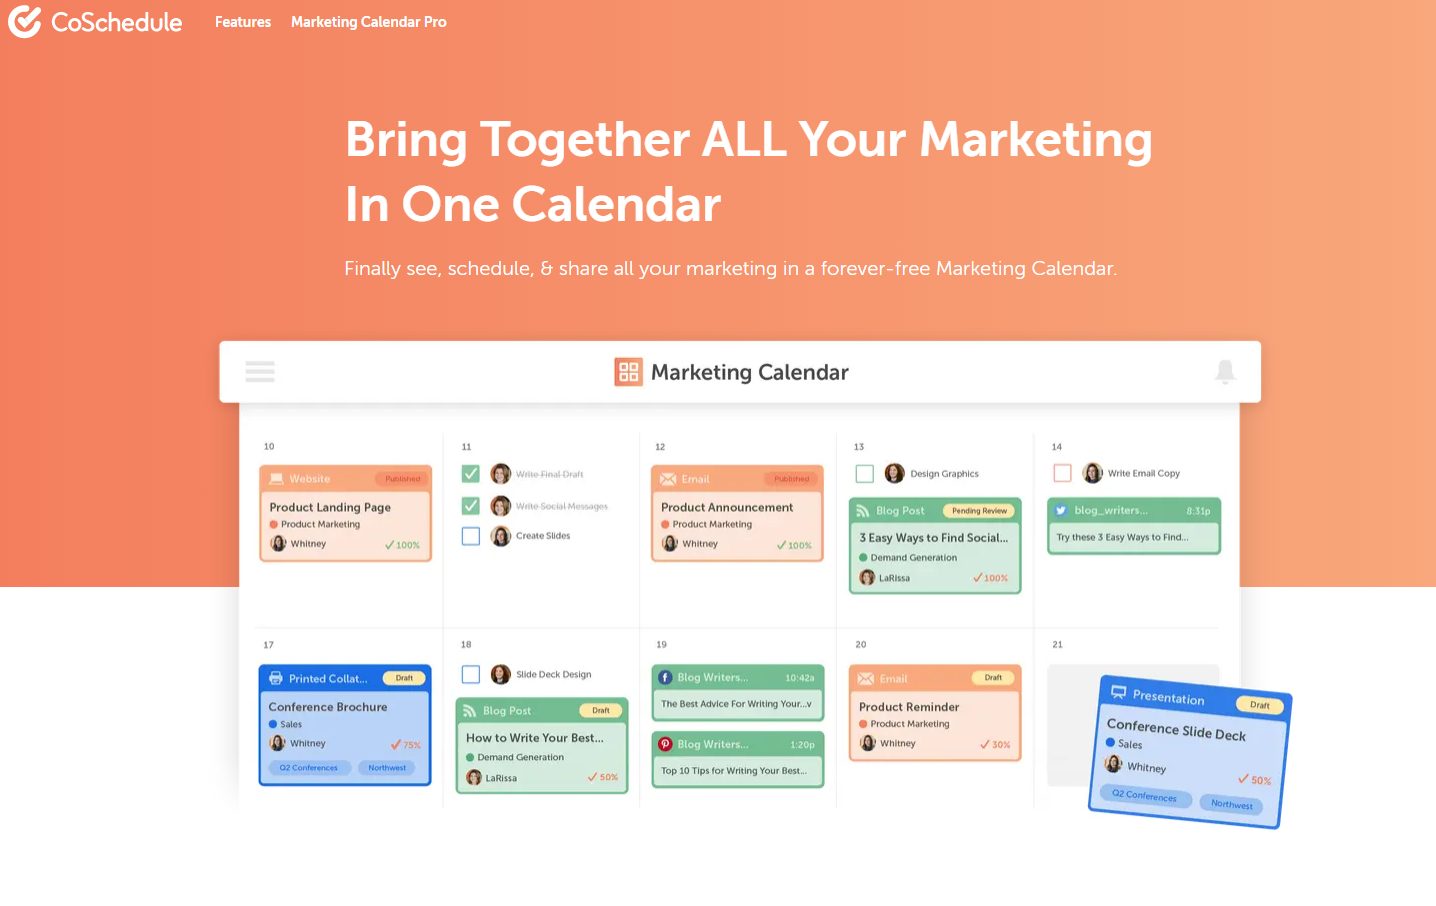 CoSchedule is a social media management tool working across different social channels like Pinterest